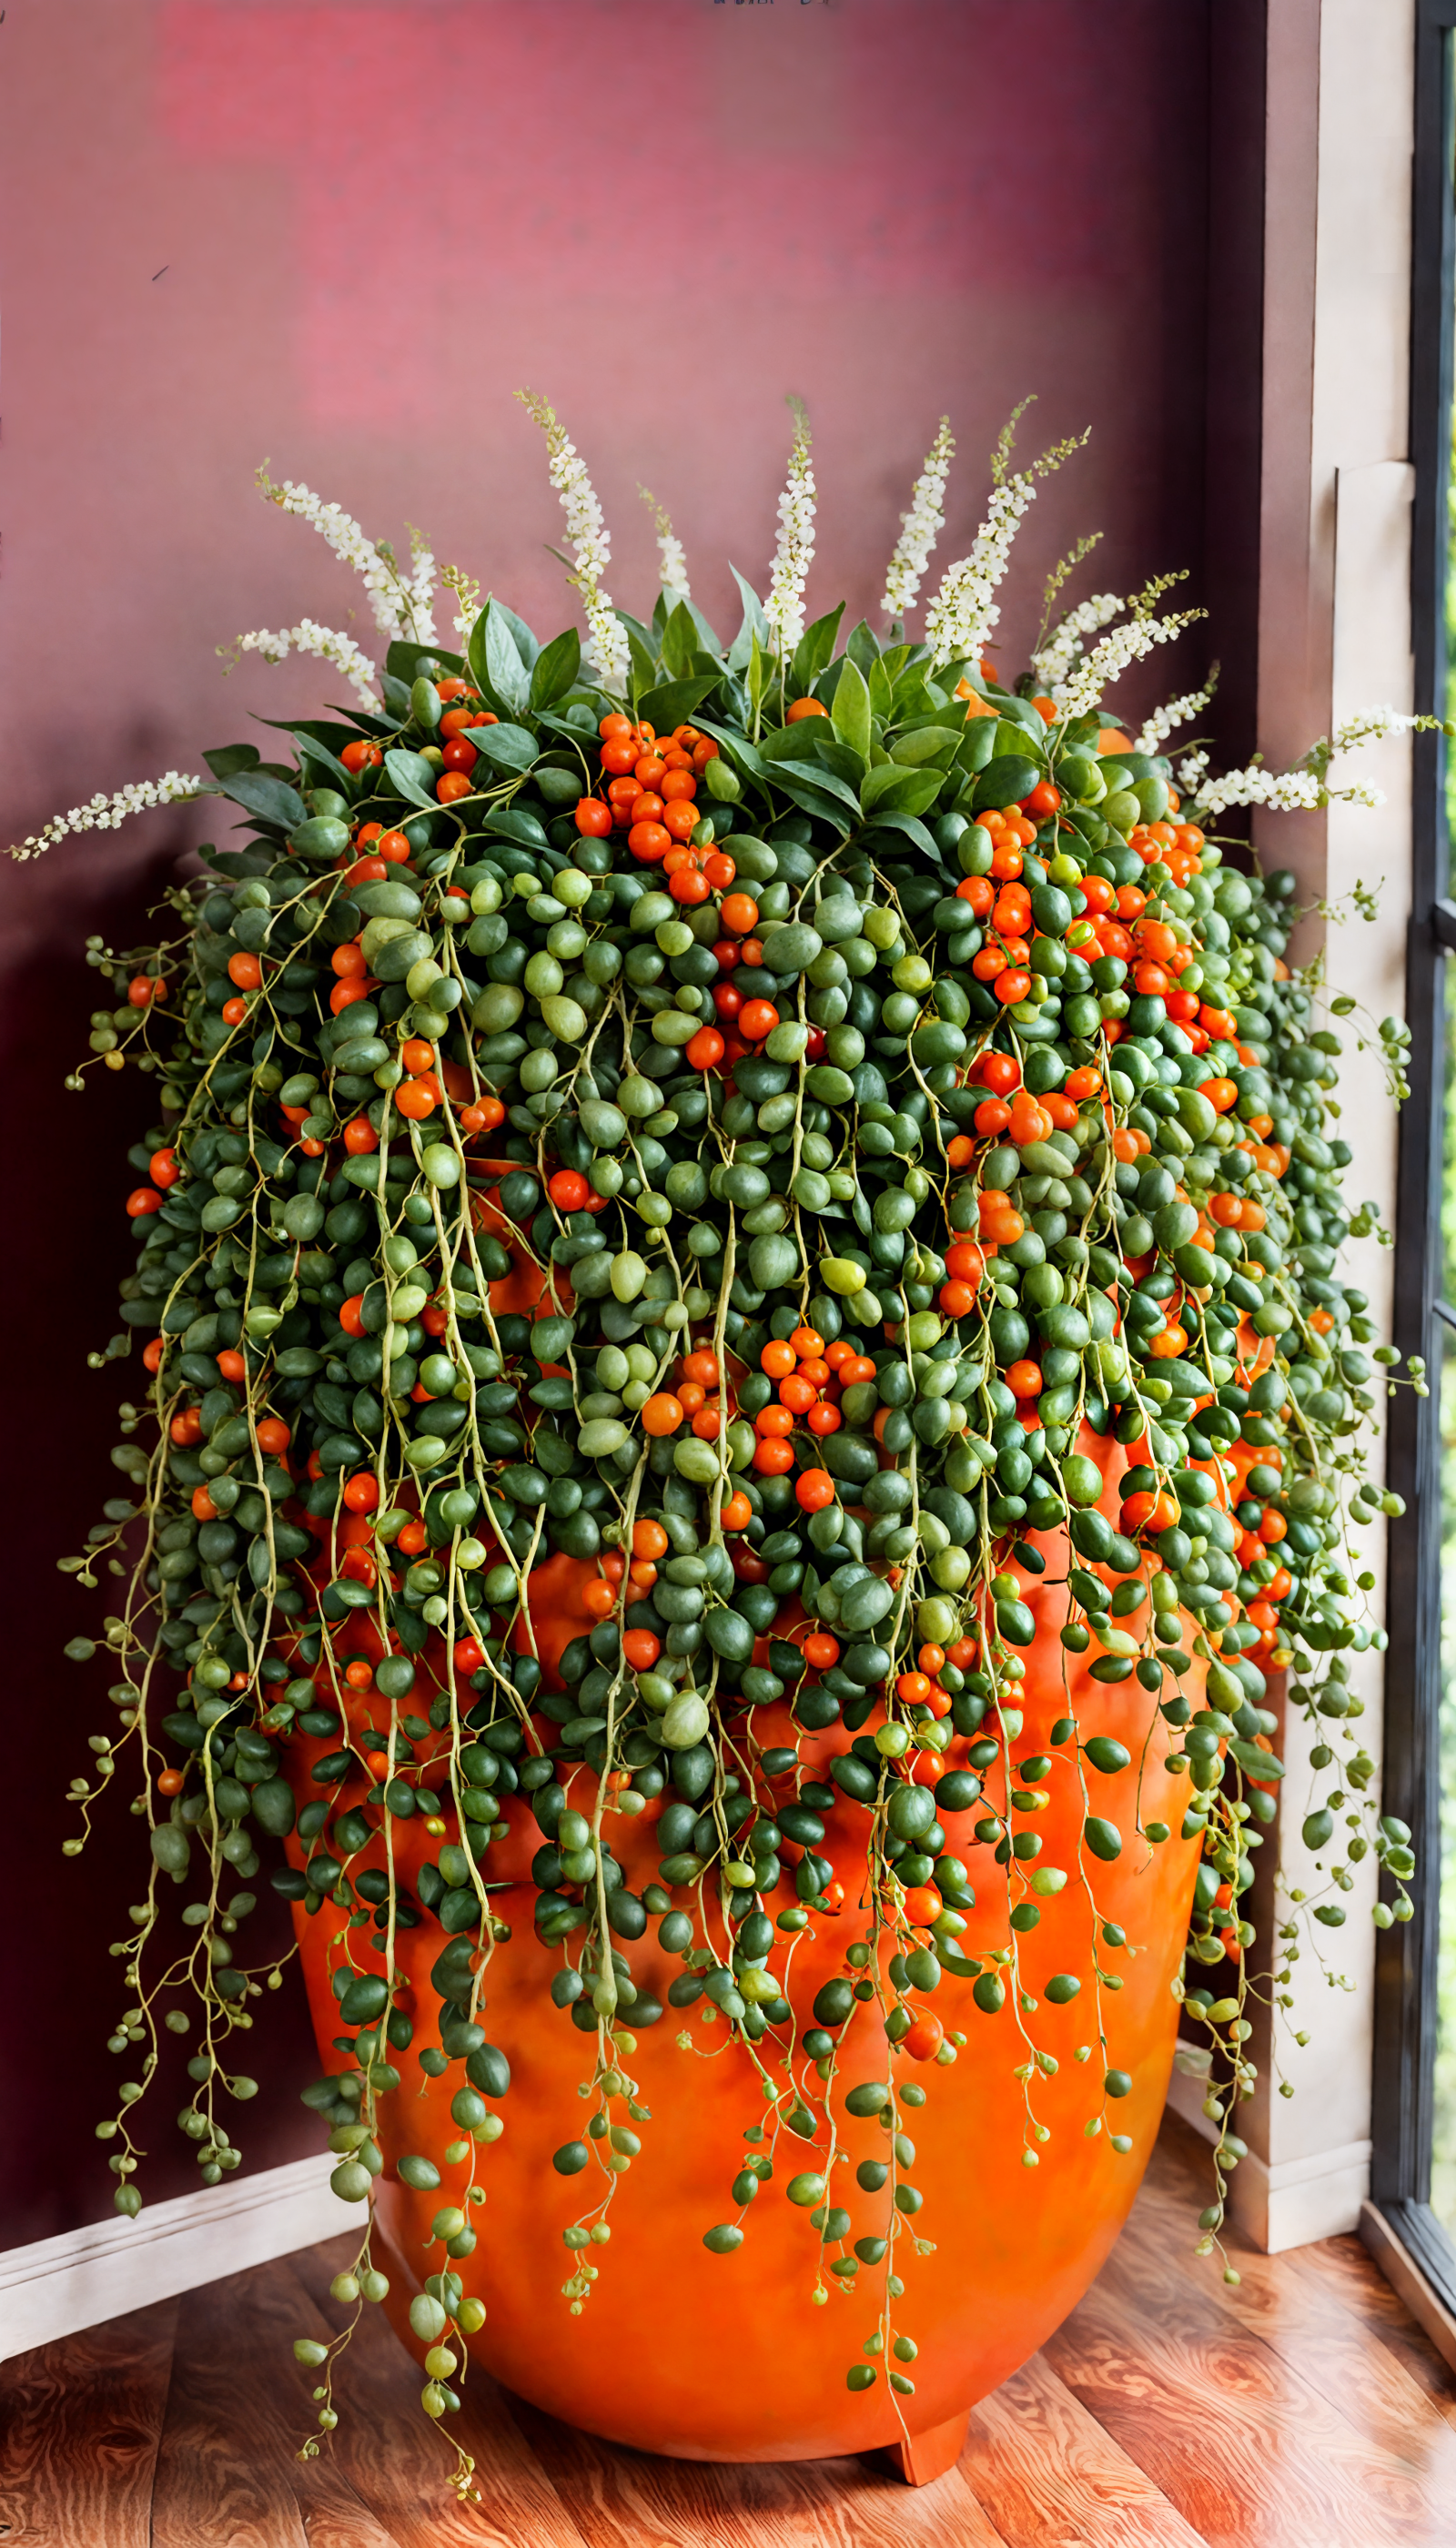 Curio rowleyanus (String of Pearls) in a planter on a wood table with oranges and tomatoes.